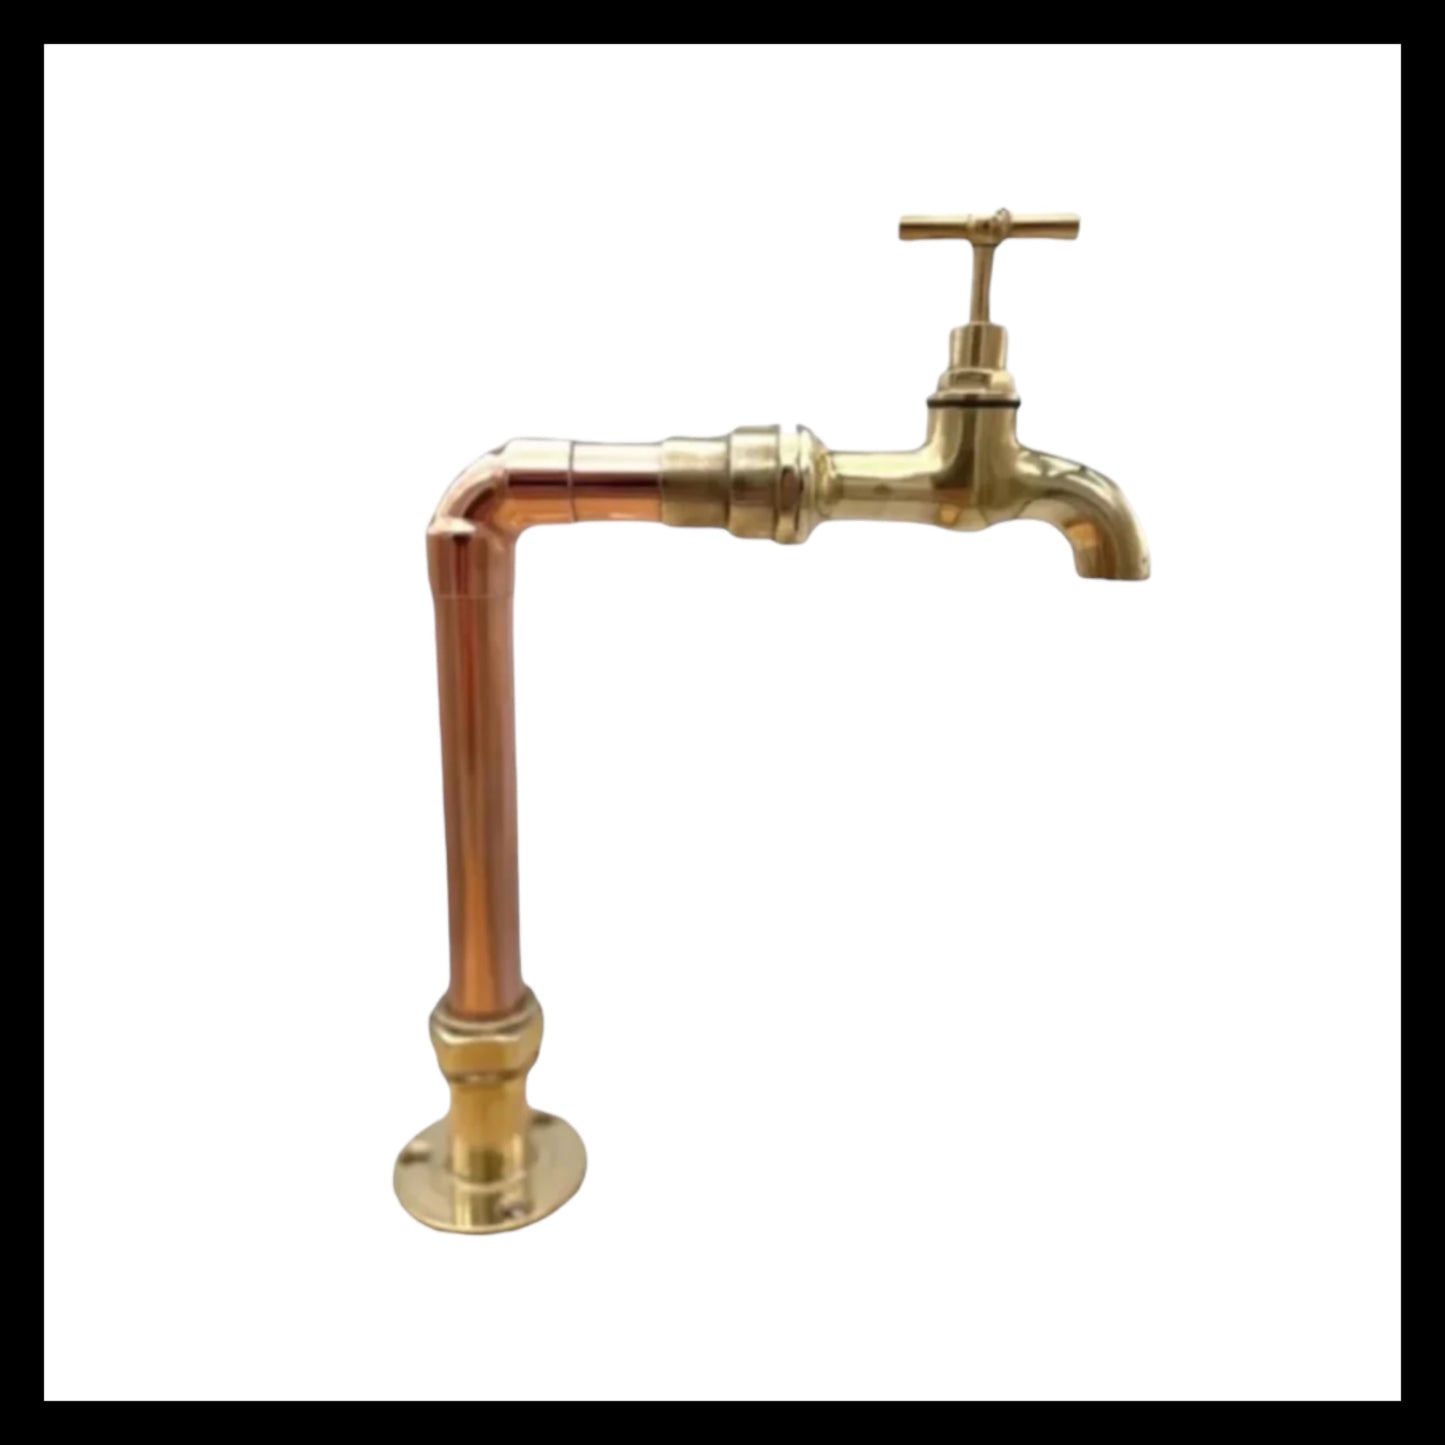 Handmade copper and brass kitchen tap sold by All Things French Store